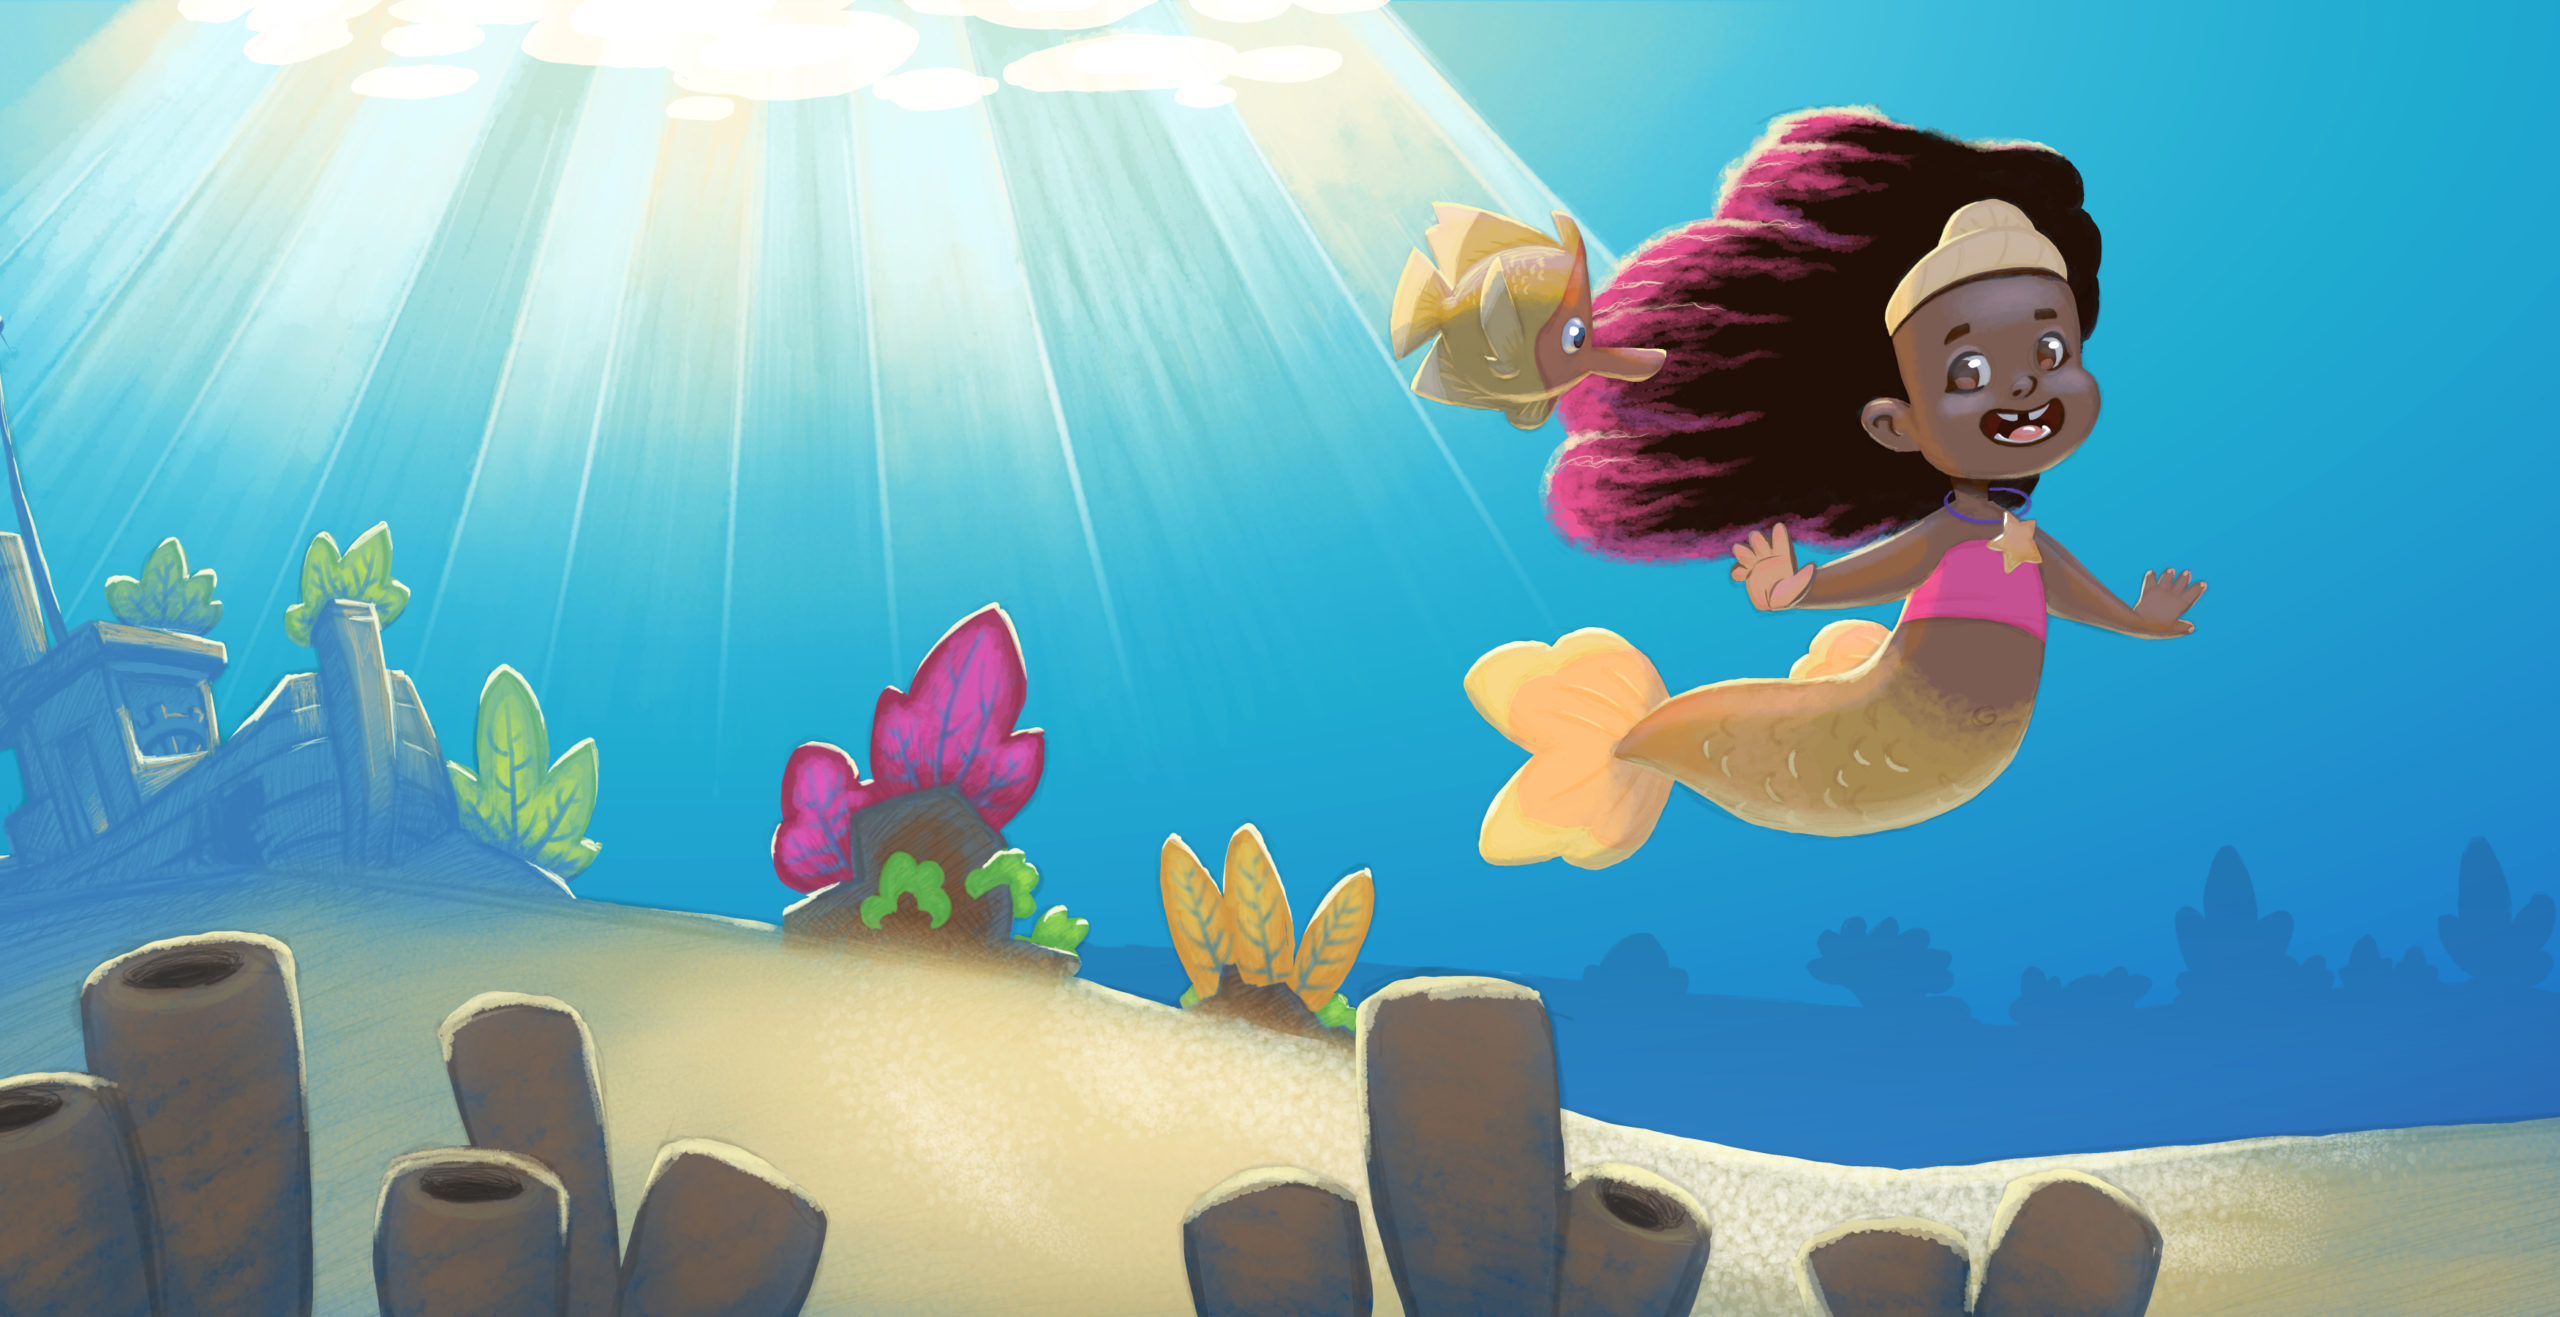 Professional Illustration for Children's Books, Games, and Education - Mermaid and The Grumpy Old Clam Pages 1 and 2